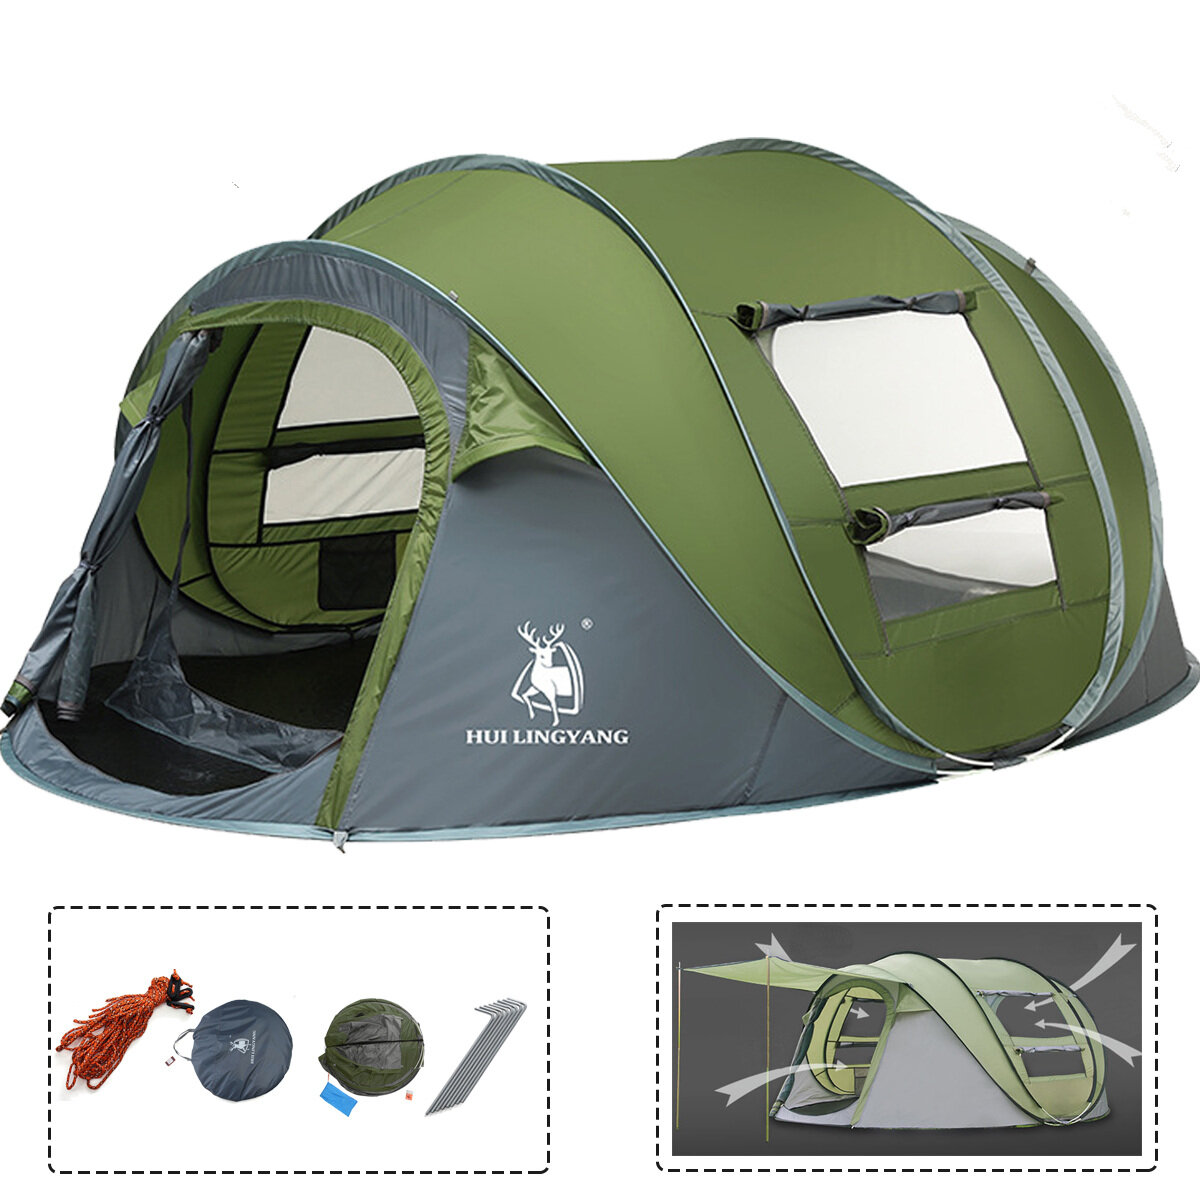 Outdoor 3-4 คนs Camping Tent Automatic Open Single Layer Canopy Waterproof Anti-UV Sunshade